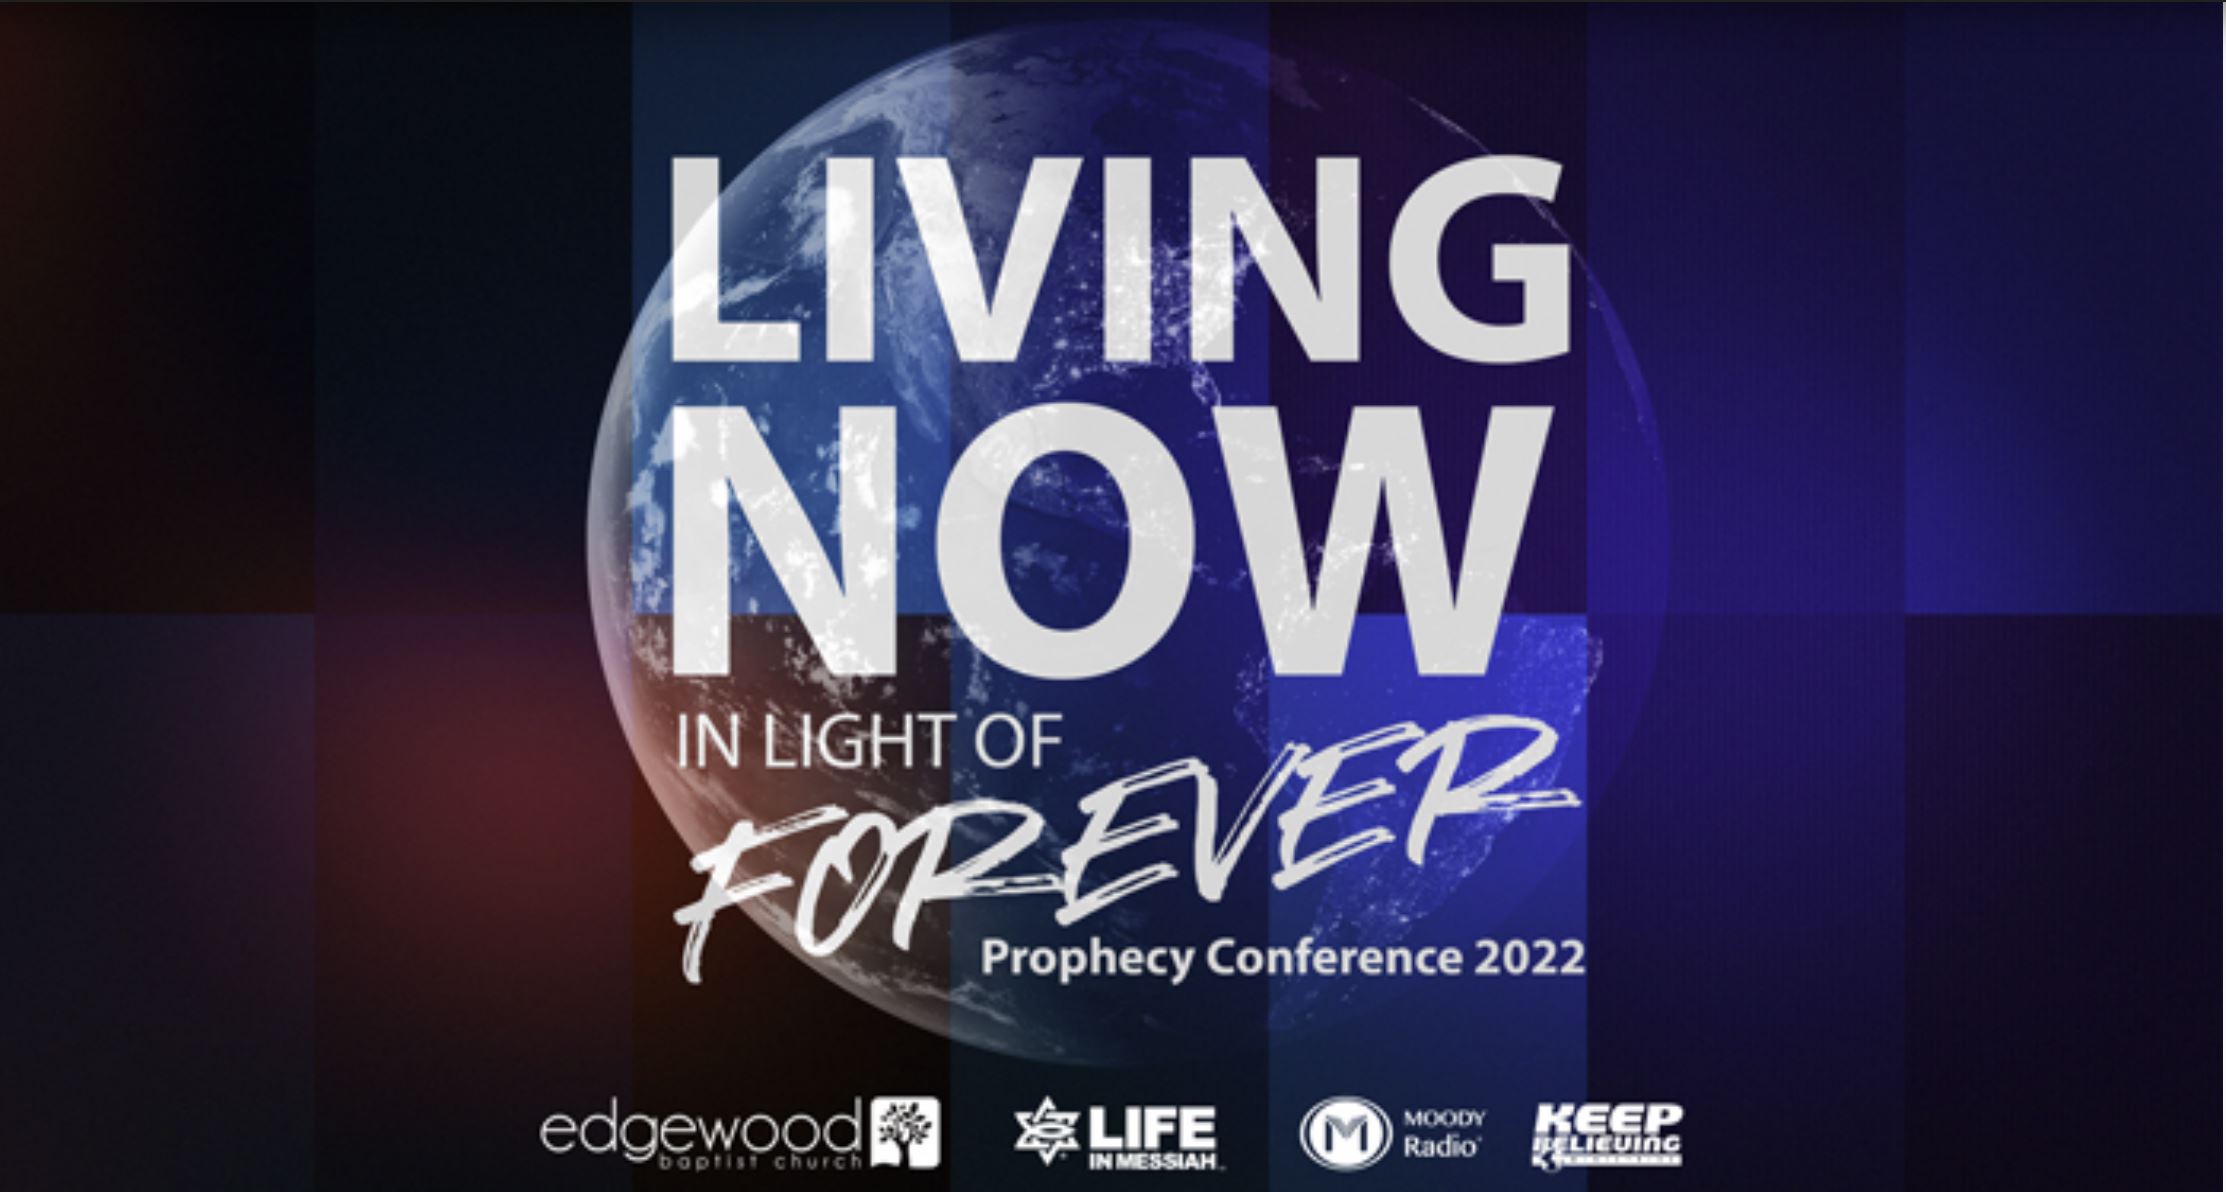 Don’t Miss The Prophecy 2022 Conference!